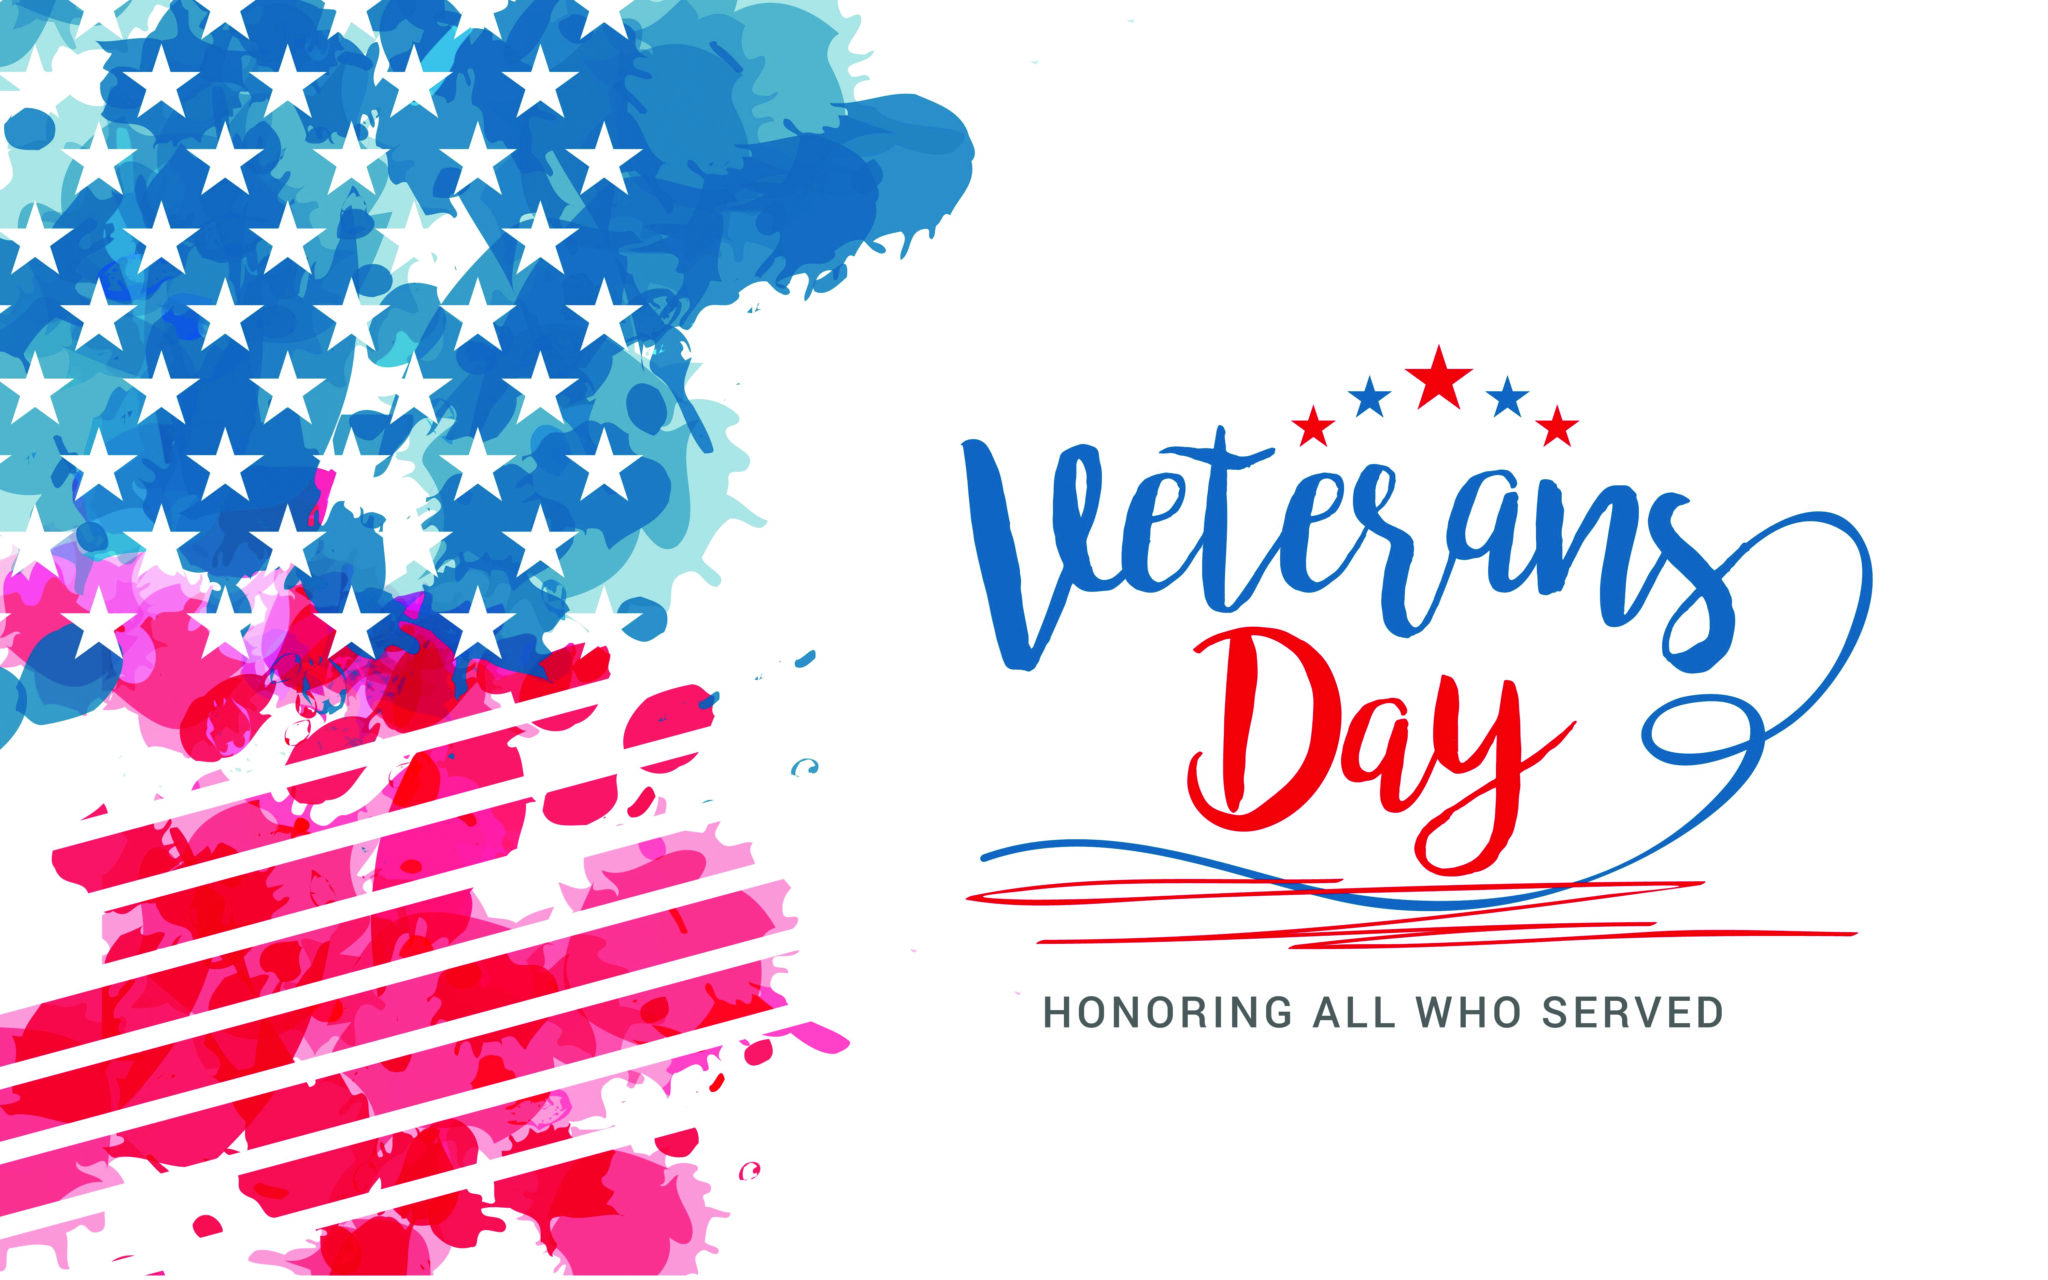 Celebrate VETERANS DAY with prayer and actions of hope The Westside